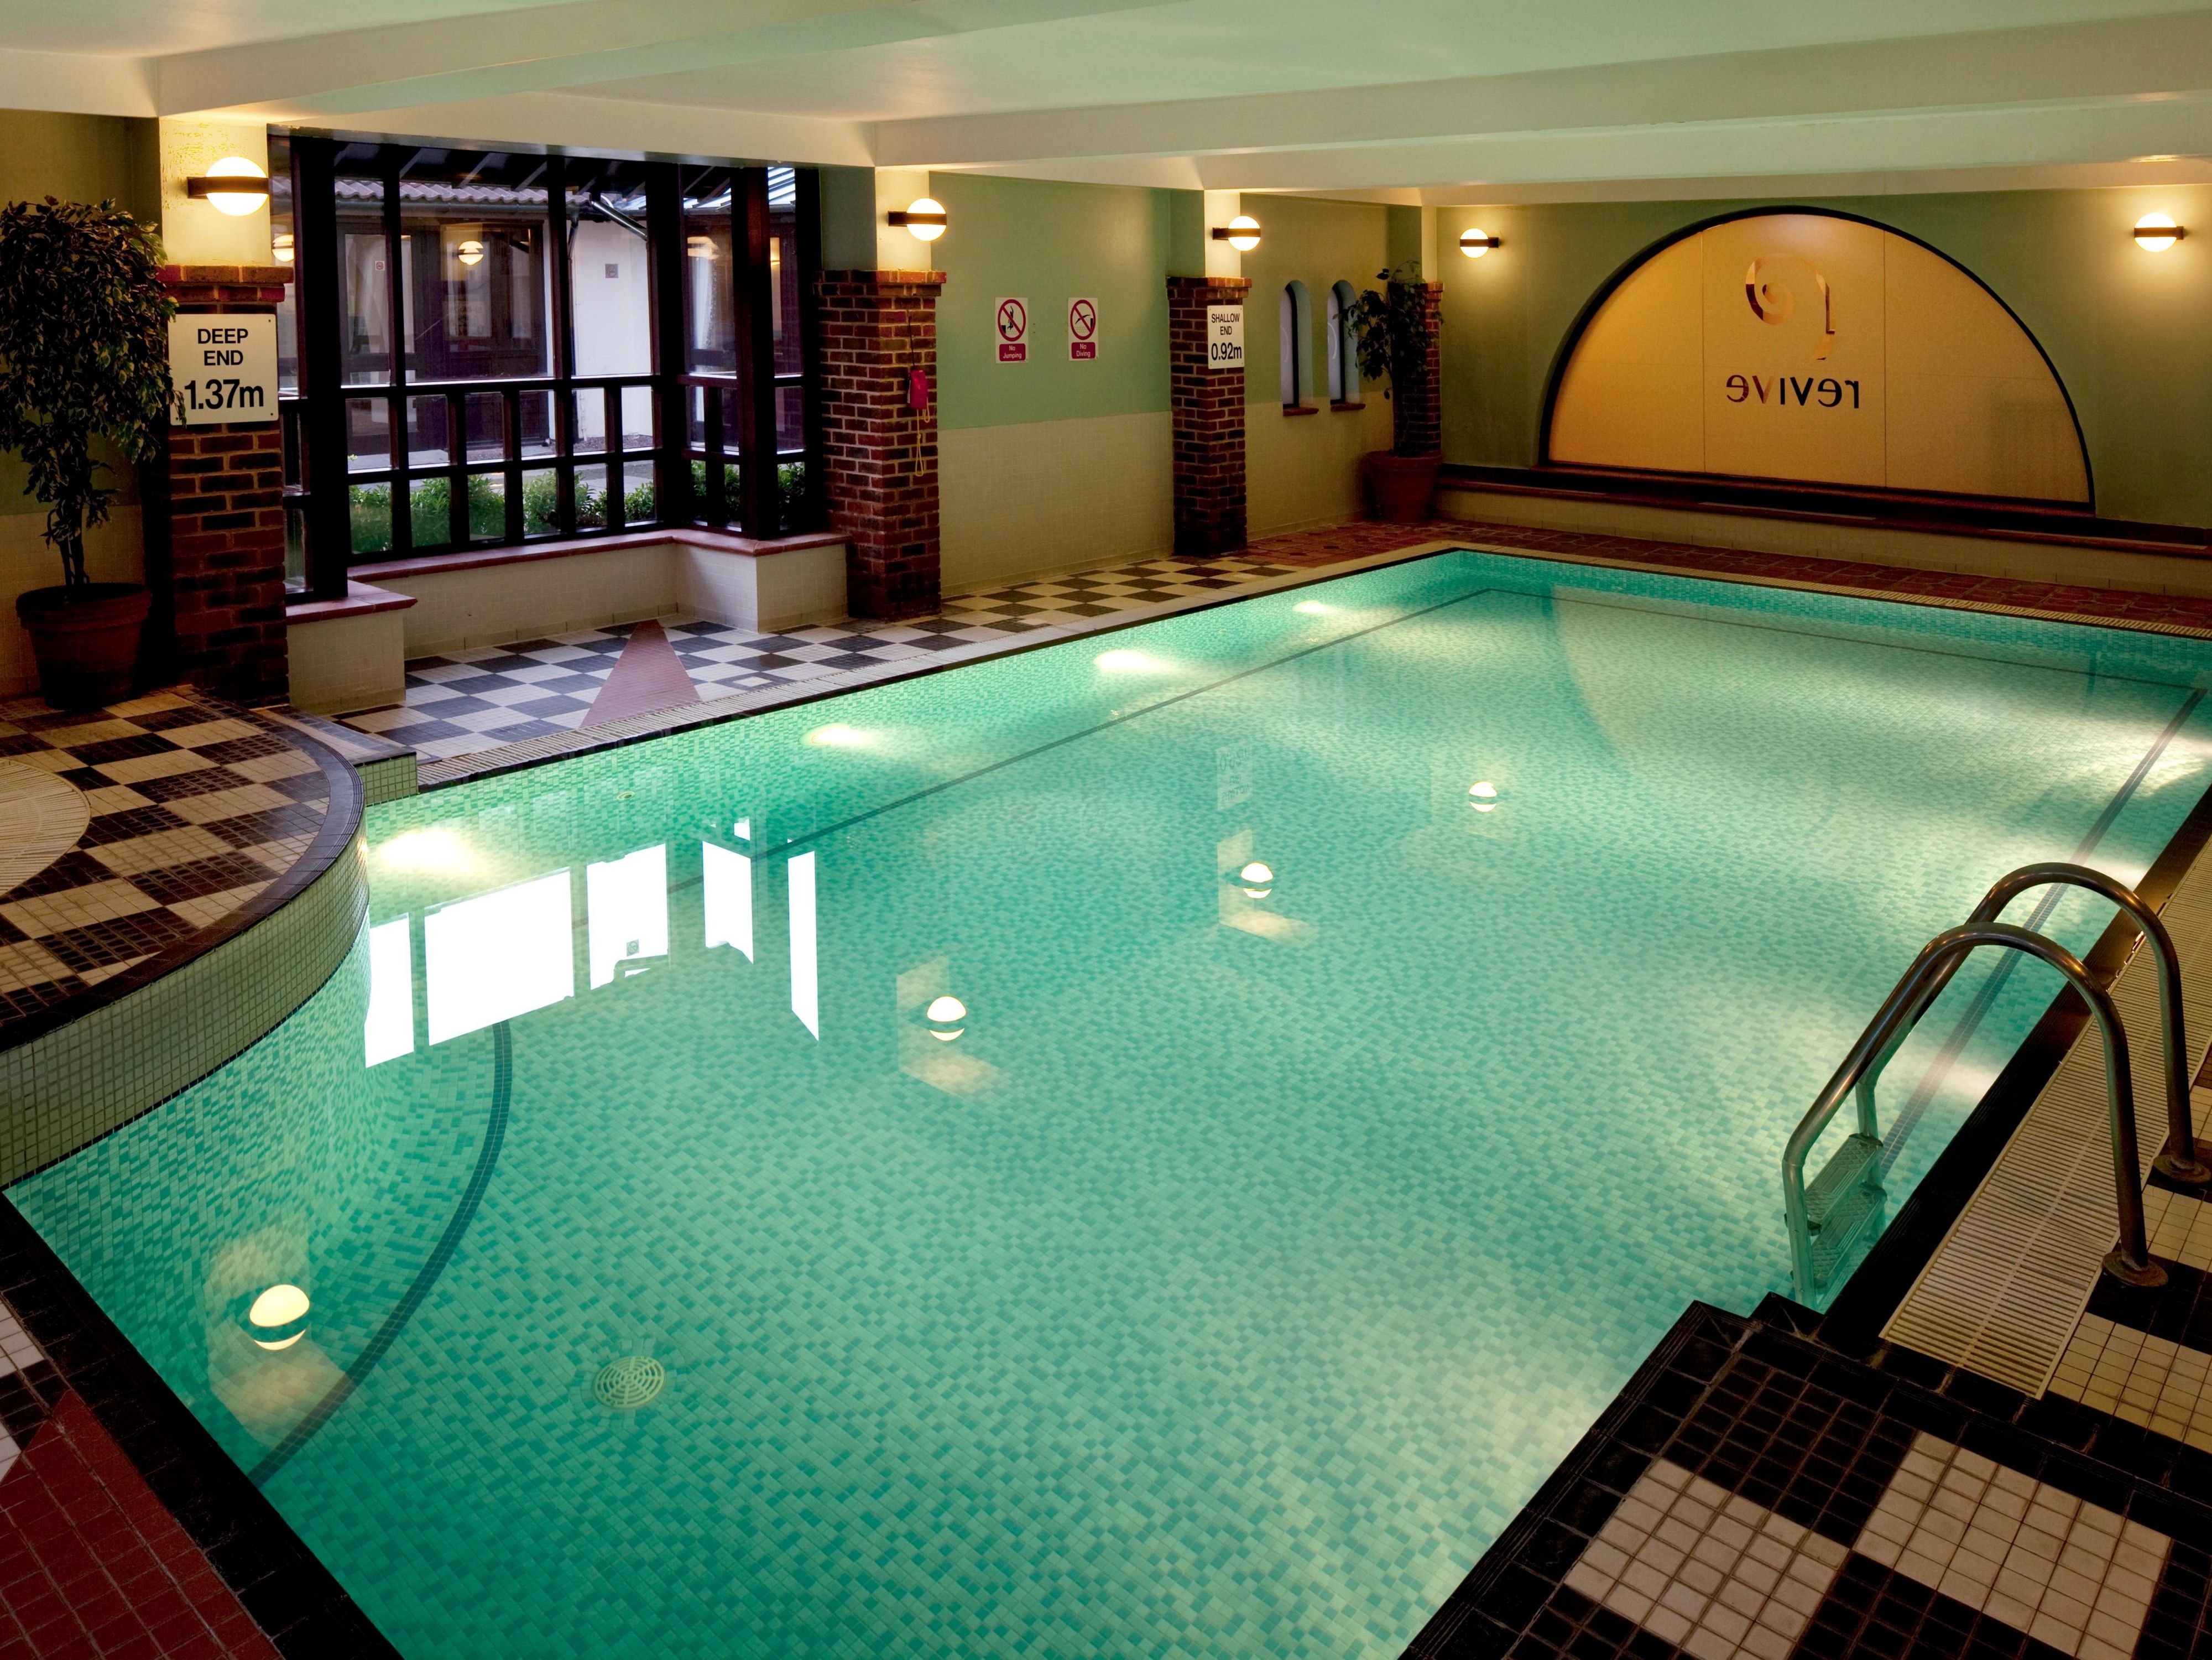 At You Fit Bromsgrove, you're invited to take advantage of: a fully-equipped gym, an indoor heated pool, Beleza Spa, luxurious beauty treatments, sauna and steam room.